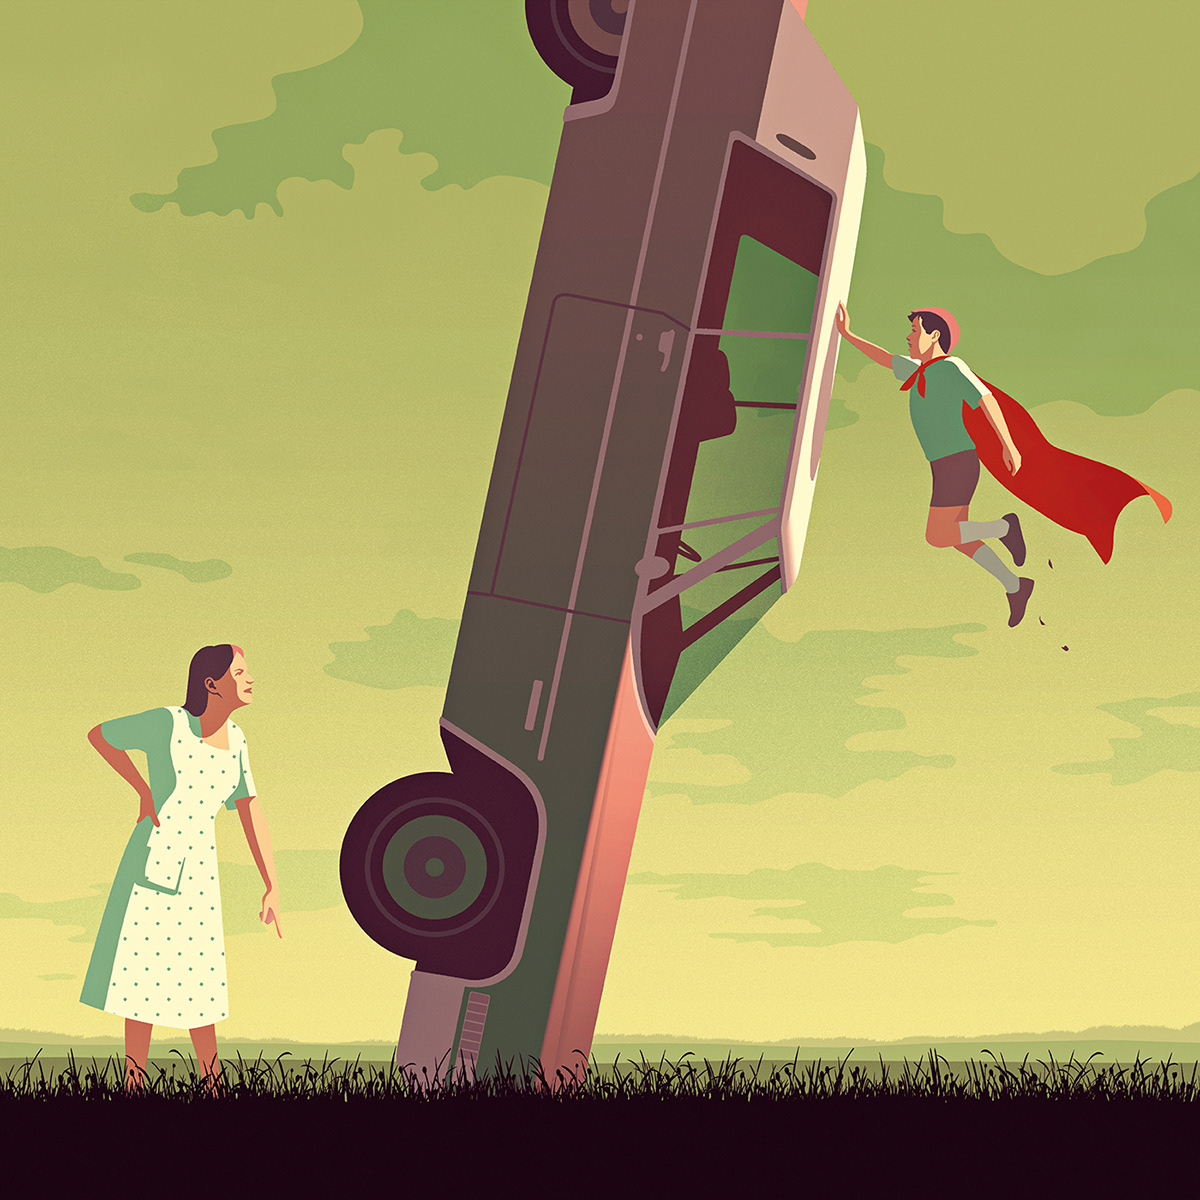 Illustration of a young superman playing with a cadillac car